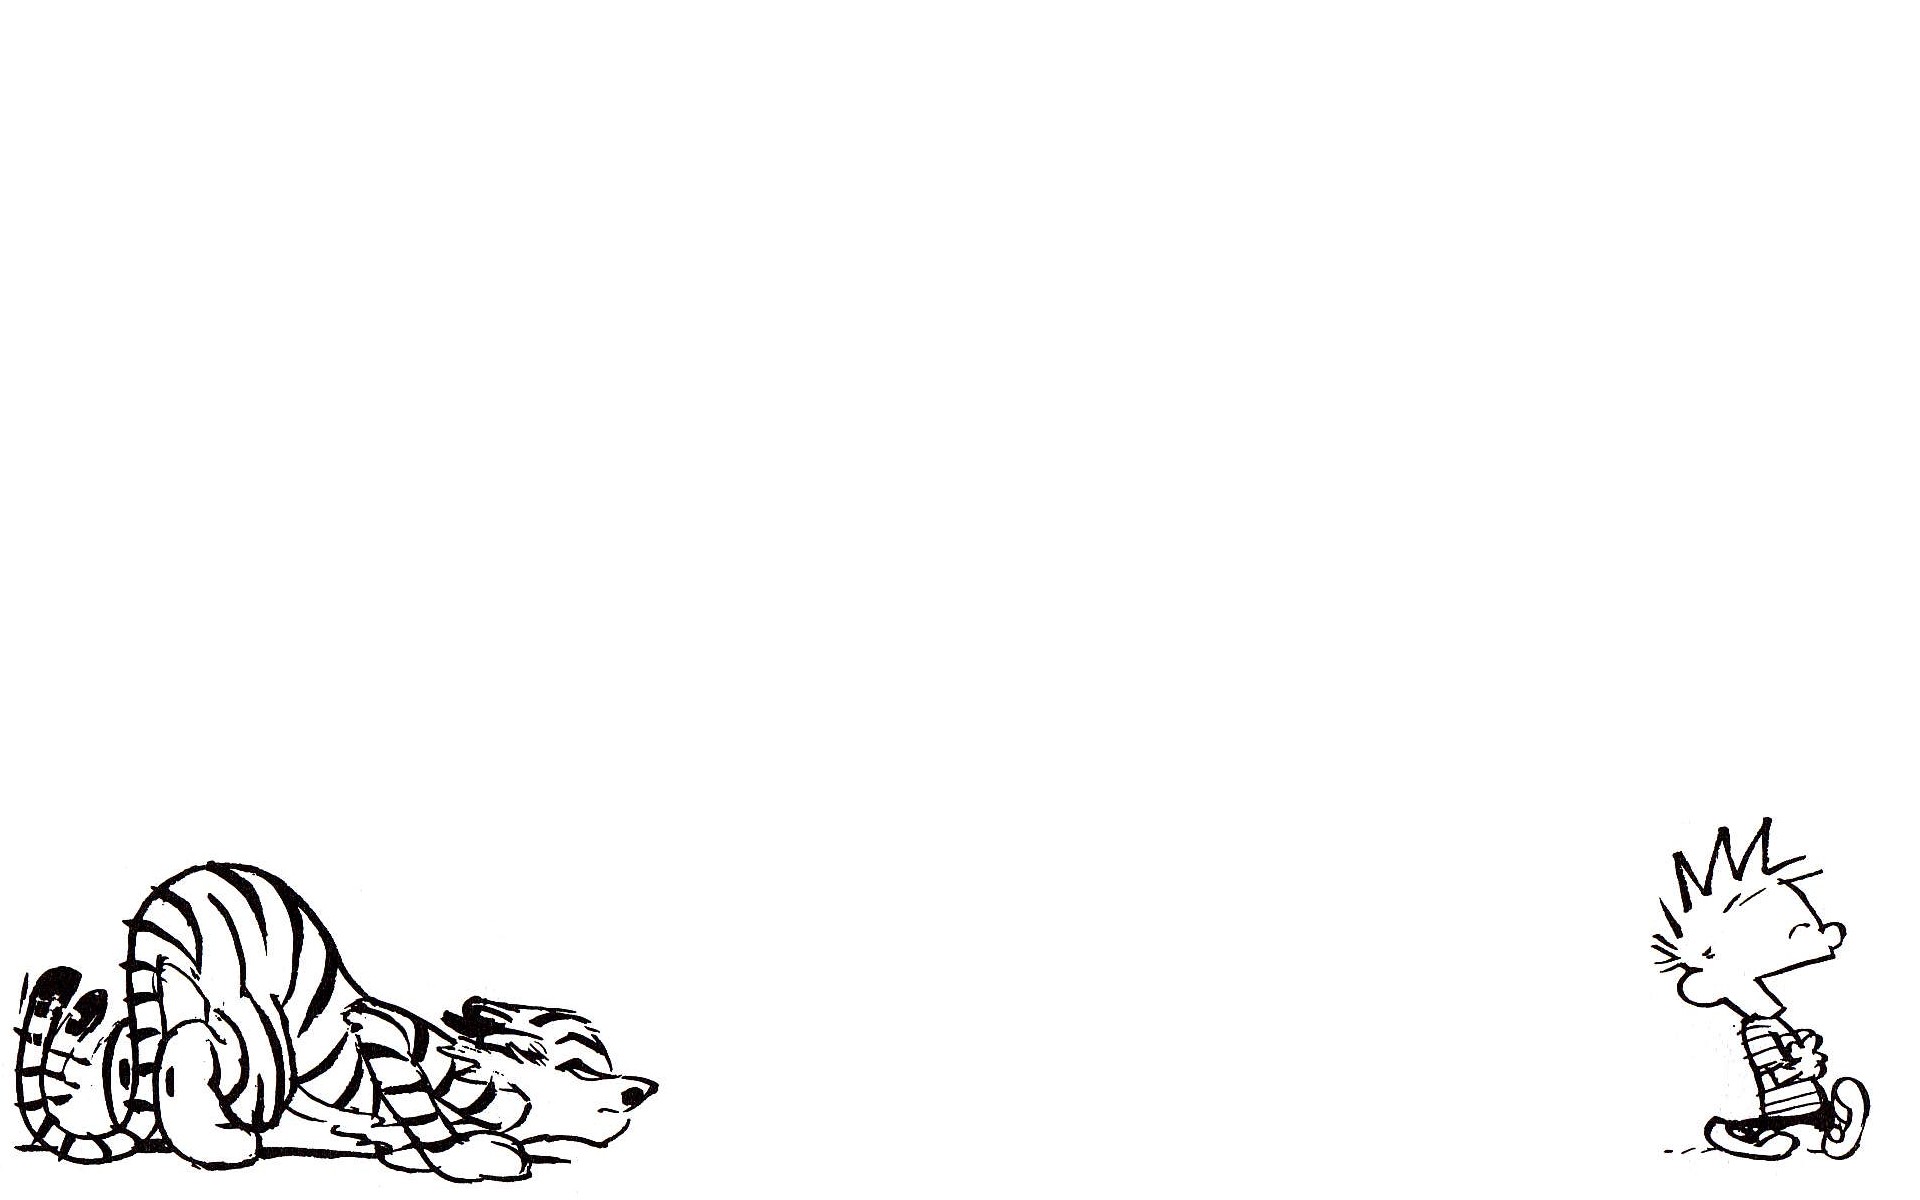 General 1920x1200 Calvin and Hobbes cartoon monochrome simple background